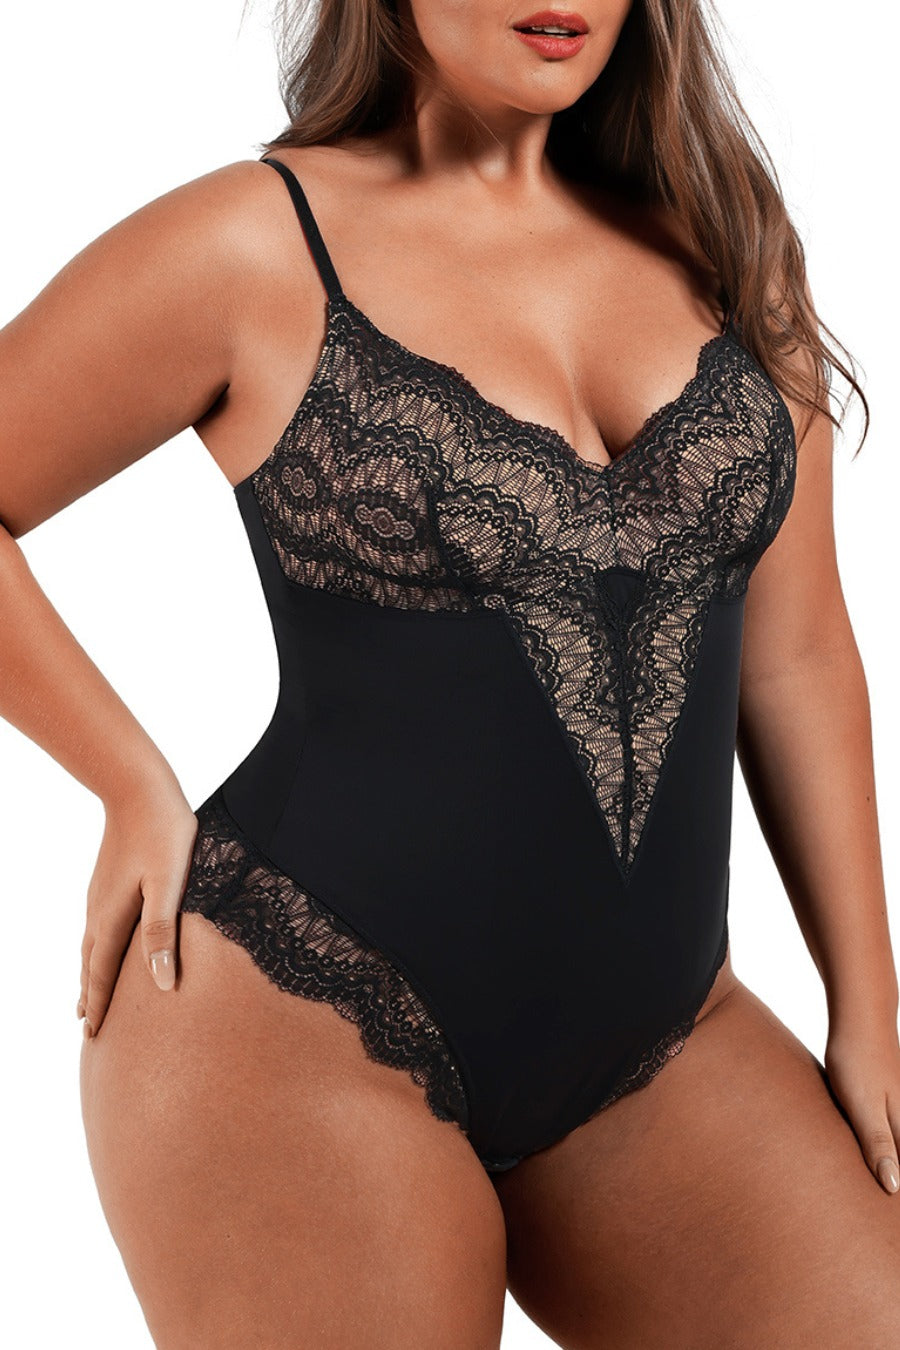 The Best Shaping Bodysuits in Australia